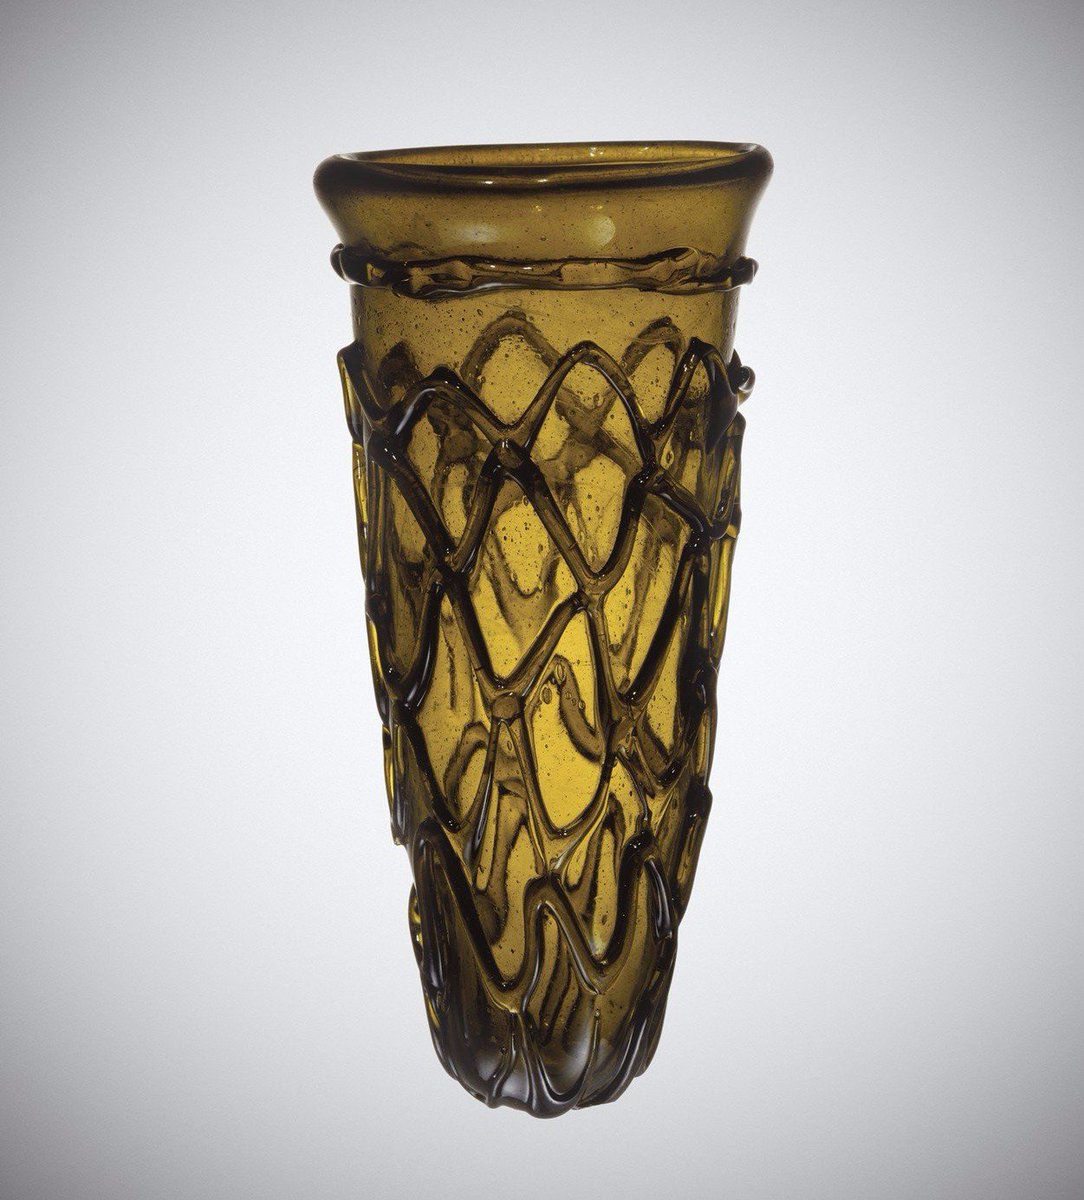 An Anglo-Saxon cone beaker found in the high-status 6th-7thC cemetery at Faversham, Kent ( https://www.cmog.org/artwork/cone-beaker-2), and a glass claw beaker found in grave 204 (c.520–540 AD) at Finglesham, Kent, now in the Ashmolean Museum.